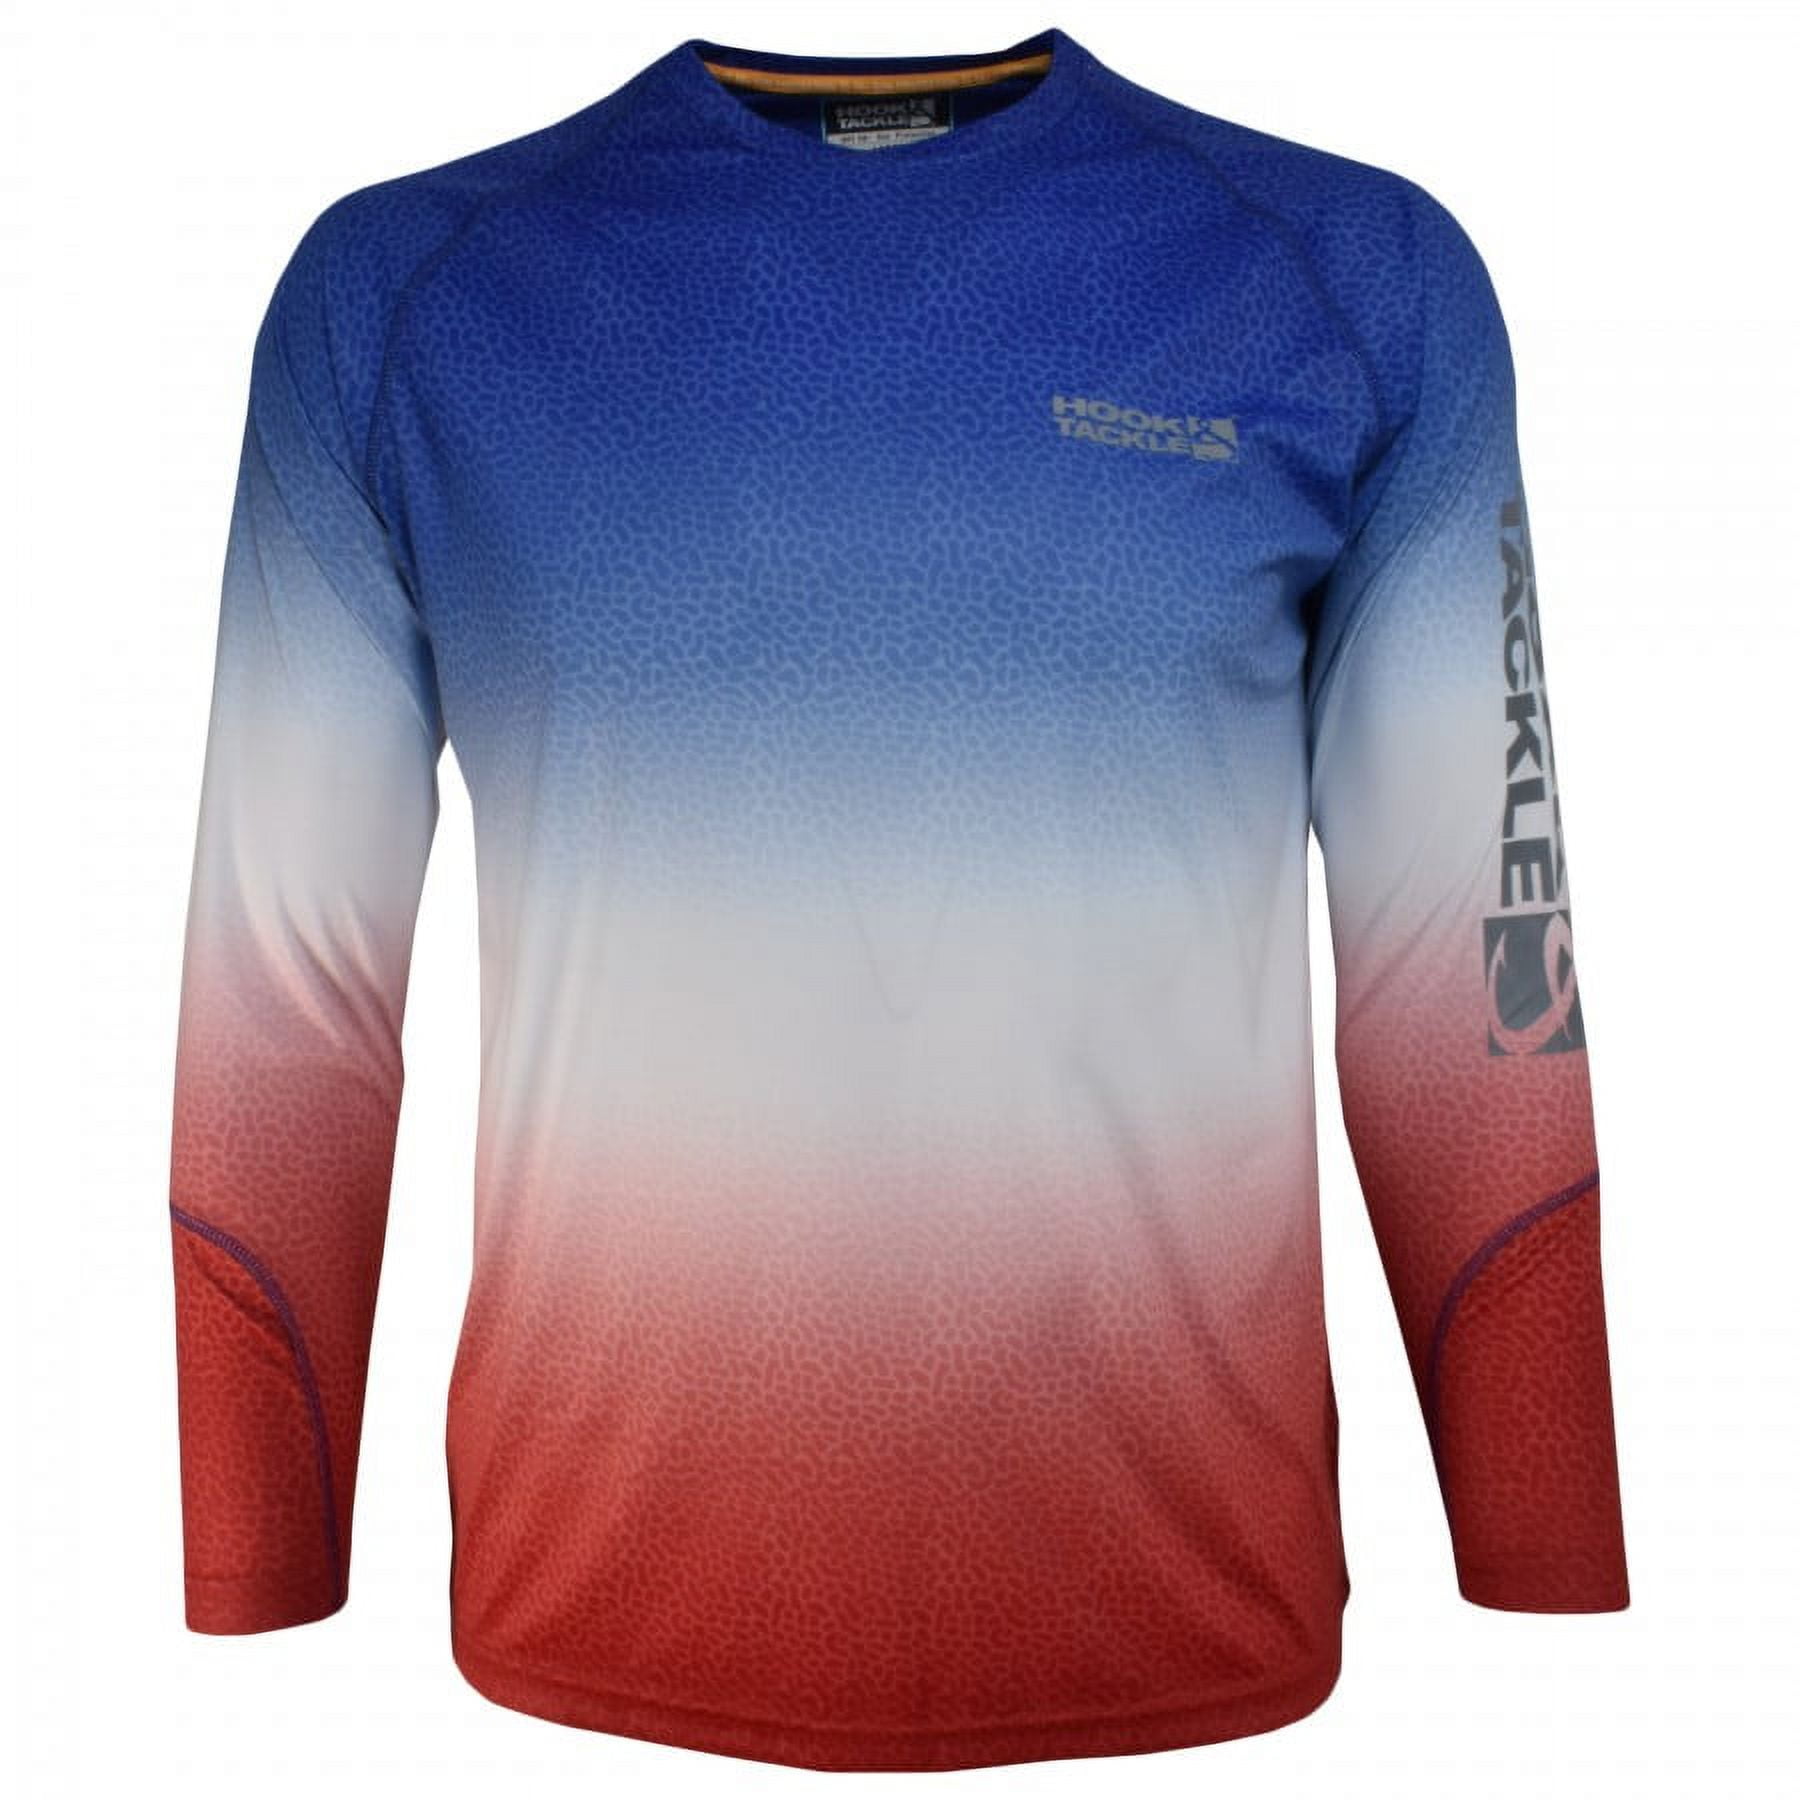 Hook & Tackle Men's Ombre Long Sleeve Performance Fishing Tee 